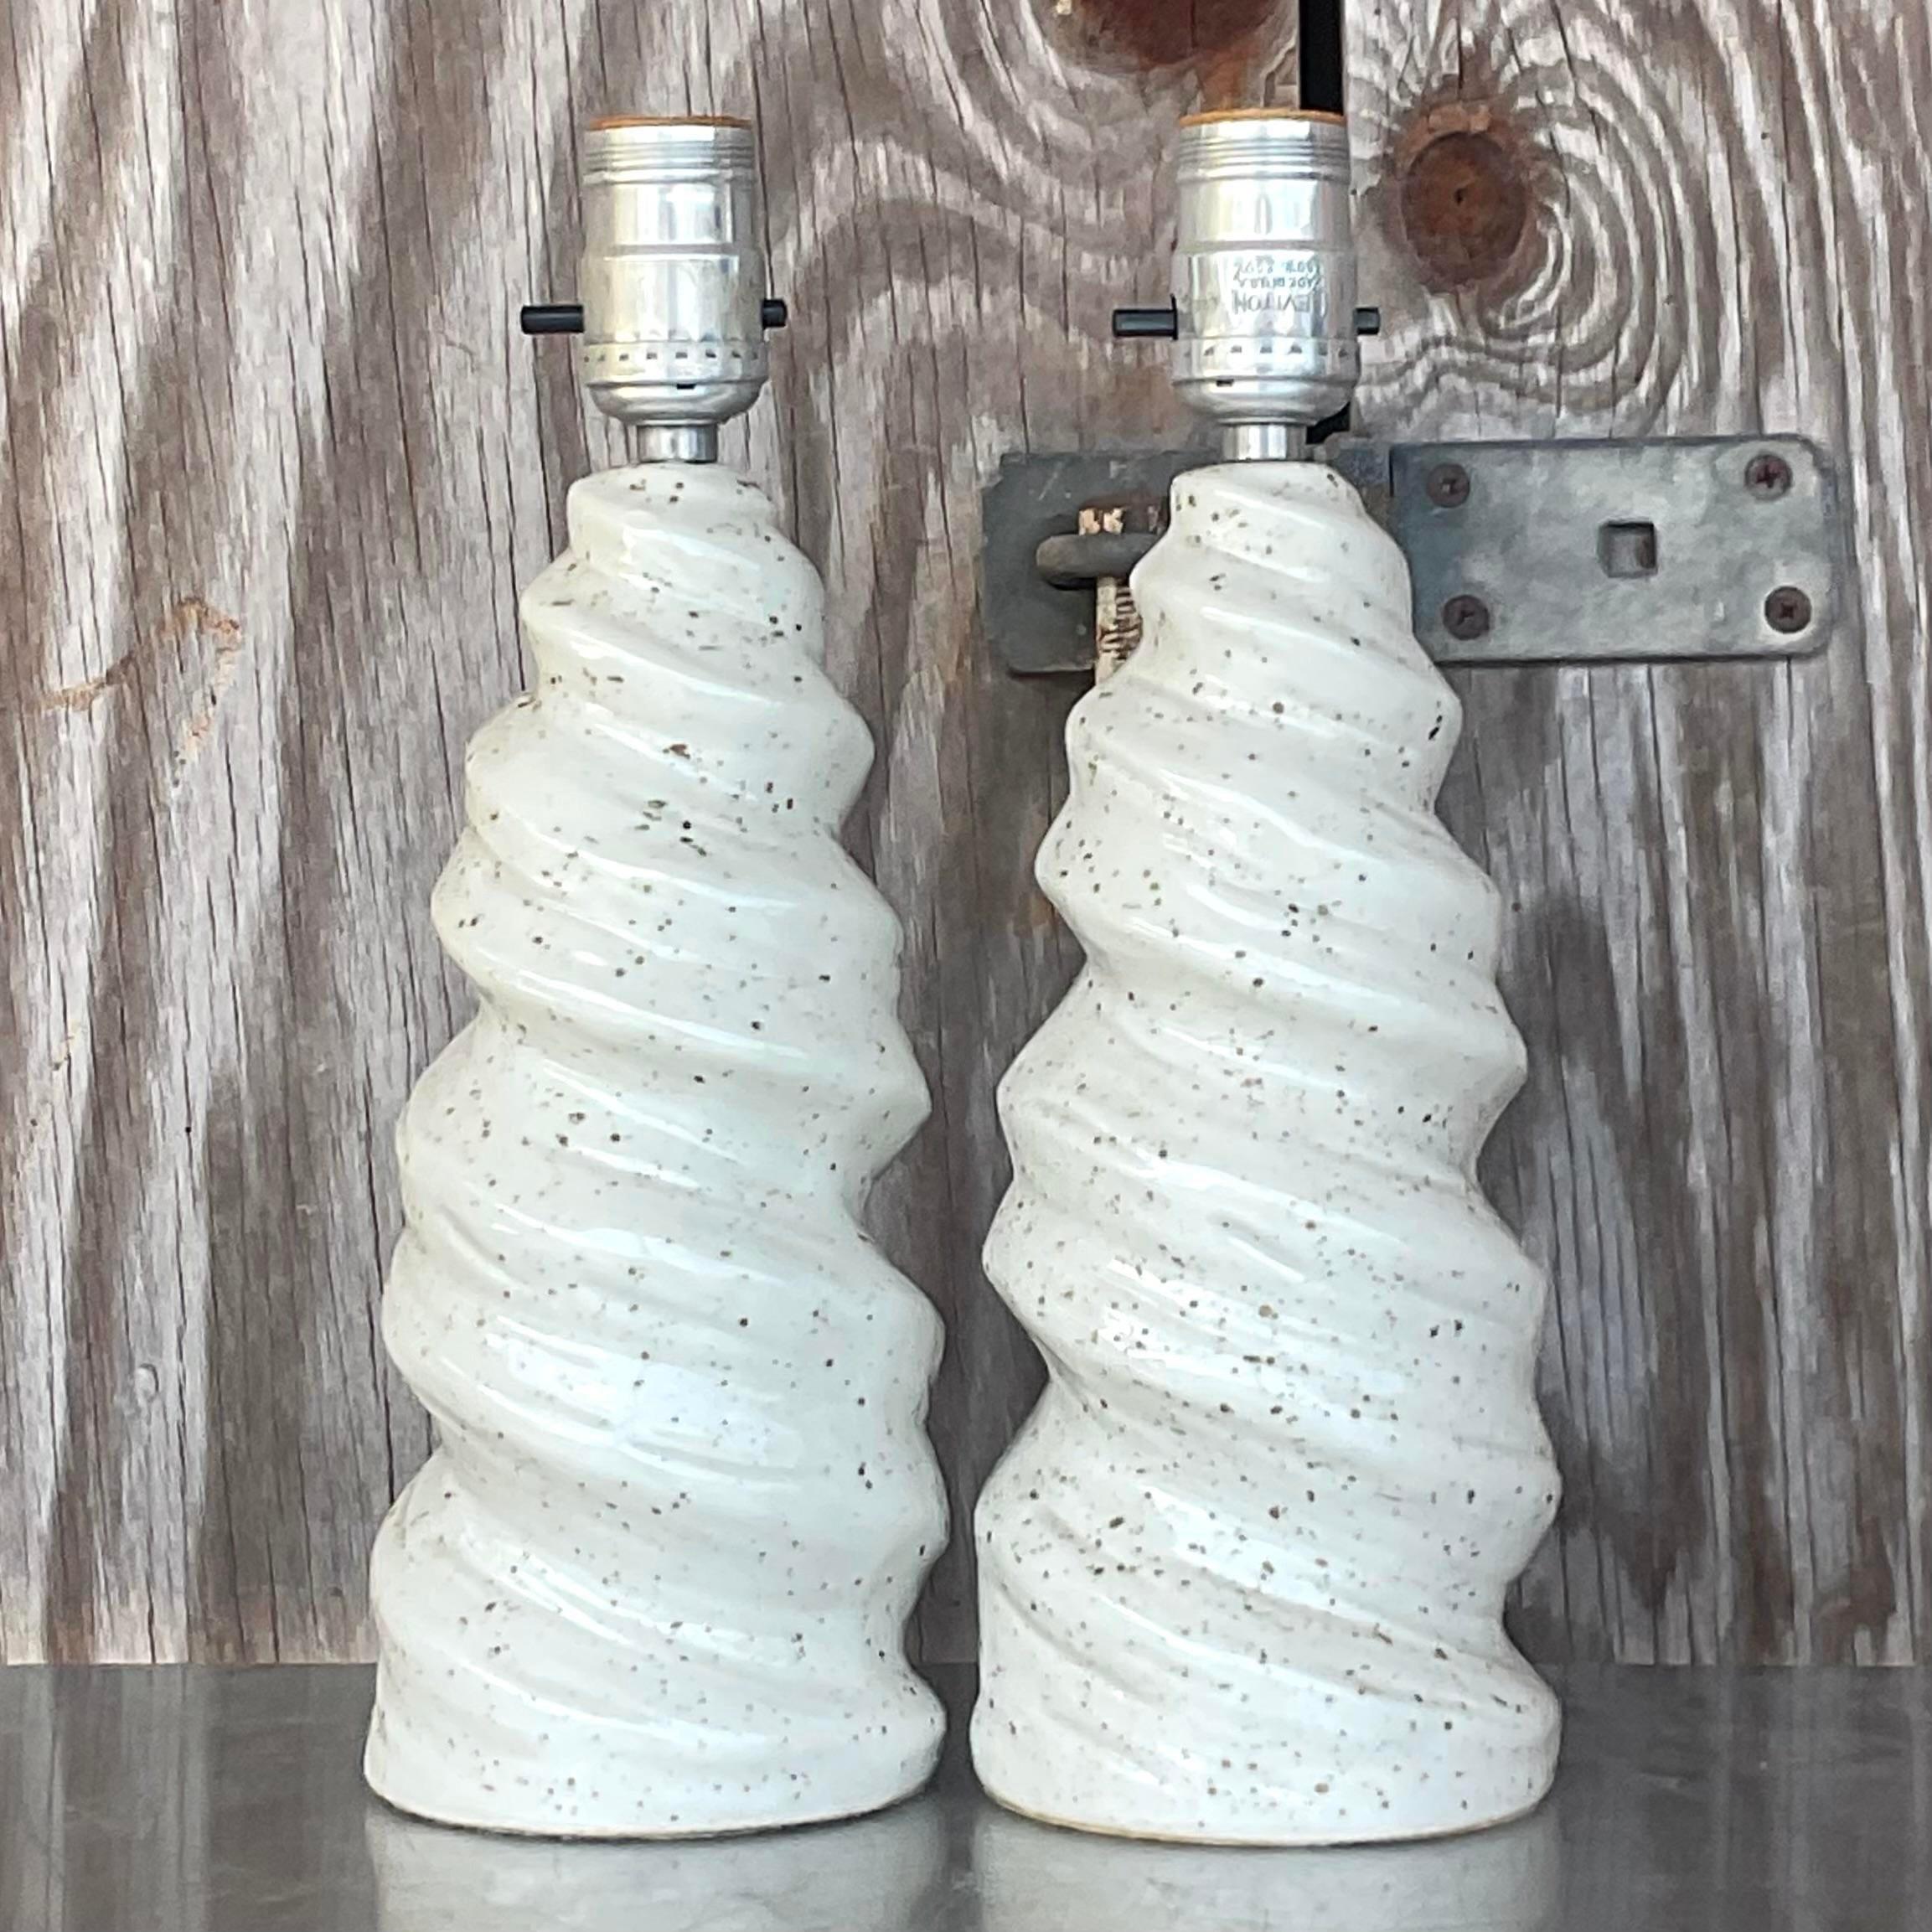 A fabulous pair of vintage Boho table lamps. A chic twist design in a neutral glazed ceramic. Acquired from a Palm Beach estate.